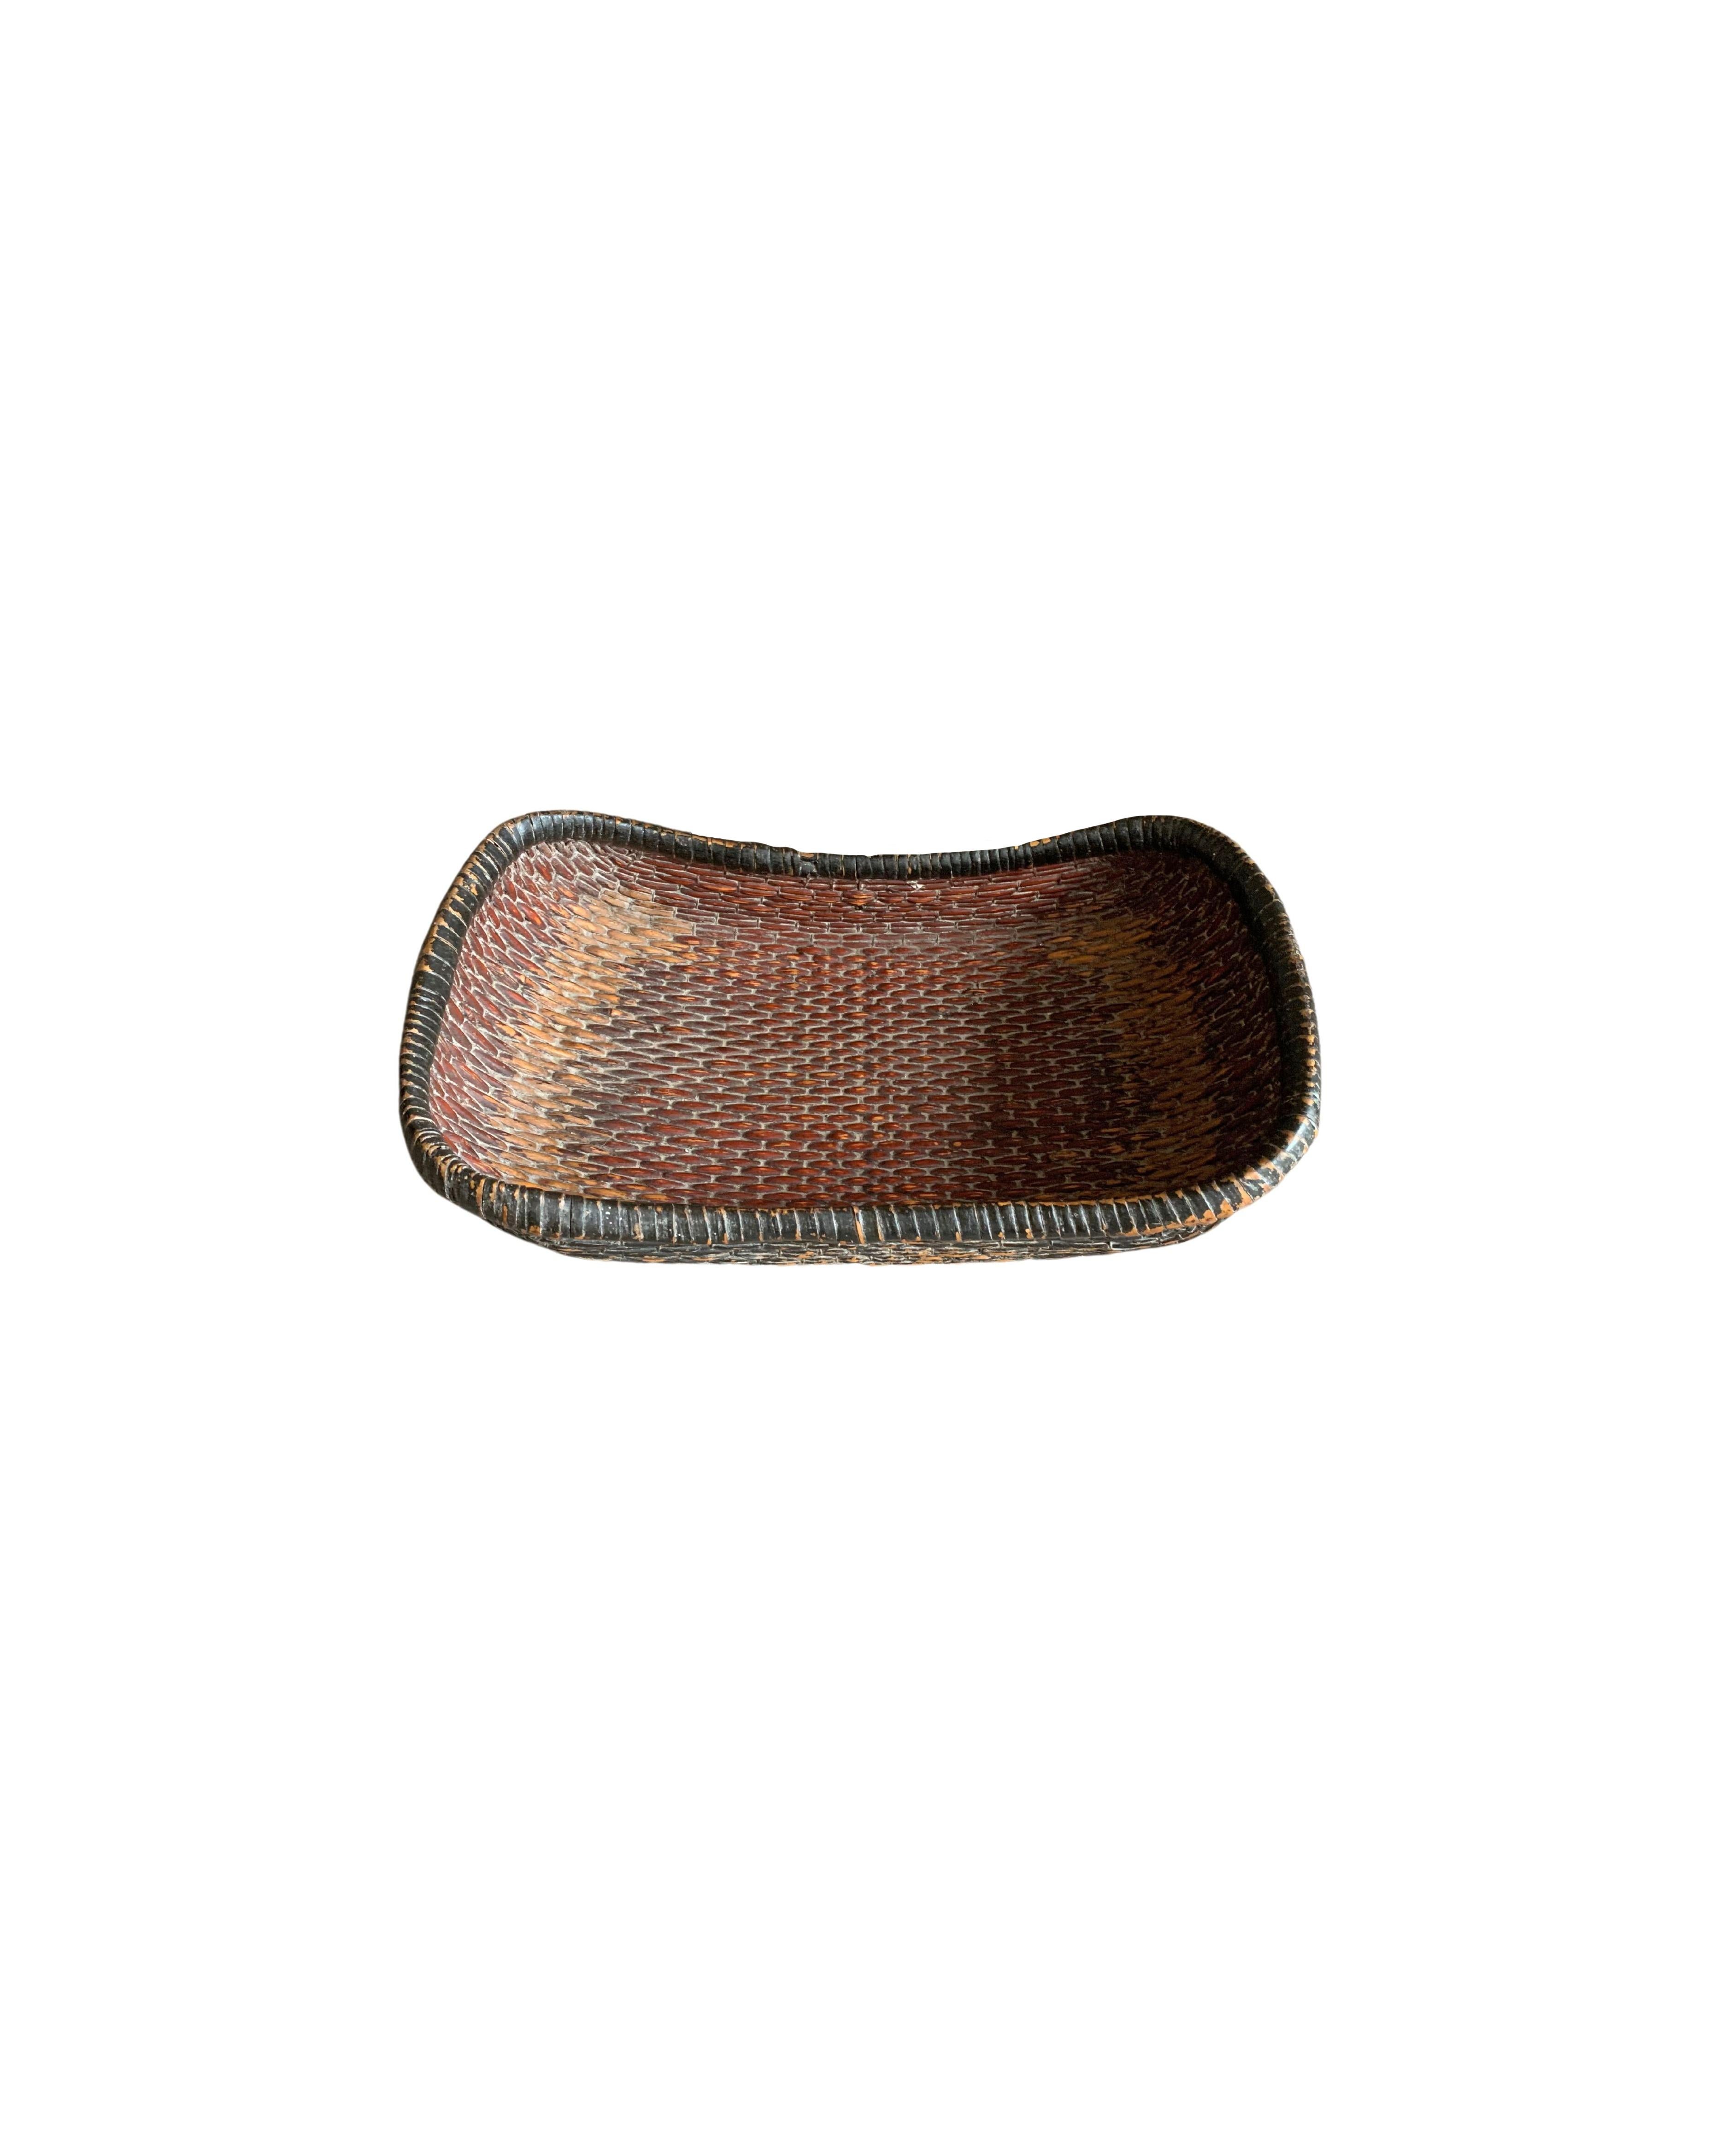 Other Chinese Willow Reed Grain Basket, c. 1900